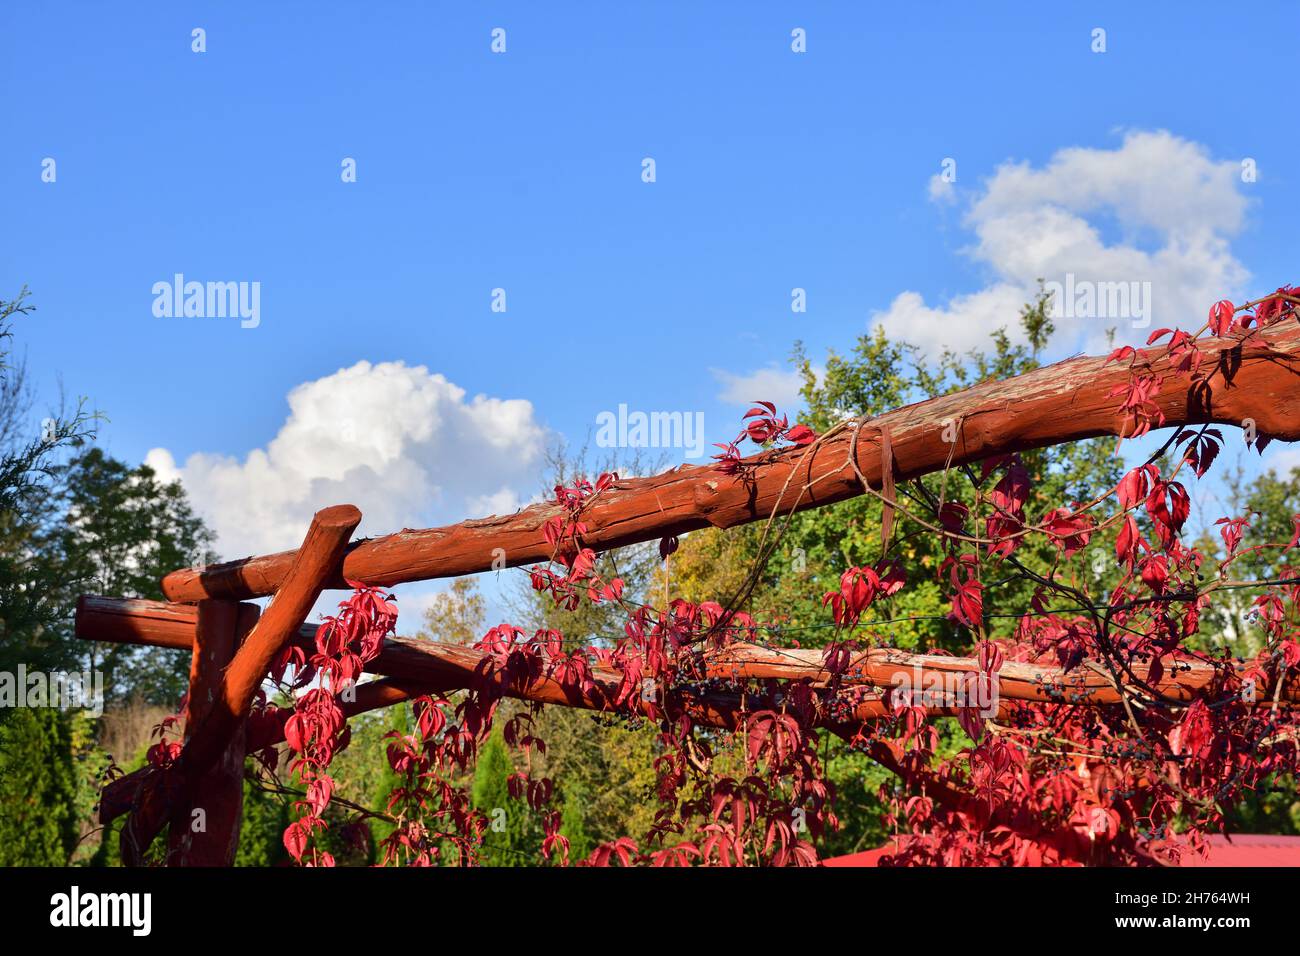 Red vine leaves on a wooden fence beam in partial shade on a sunny autumn day. Stock Photo